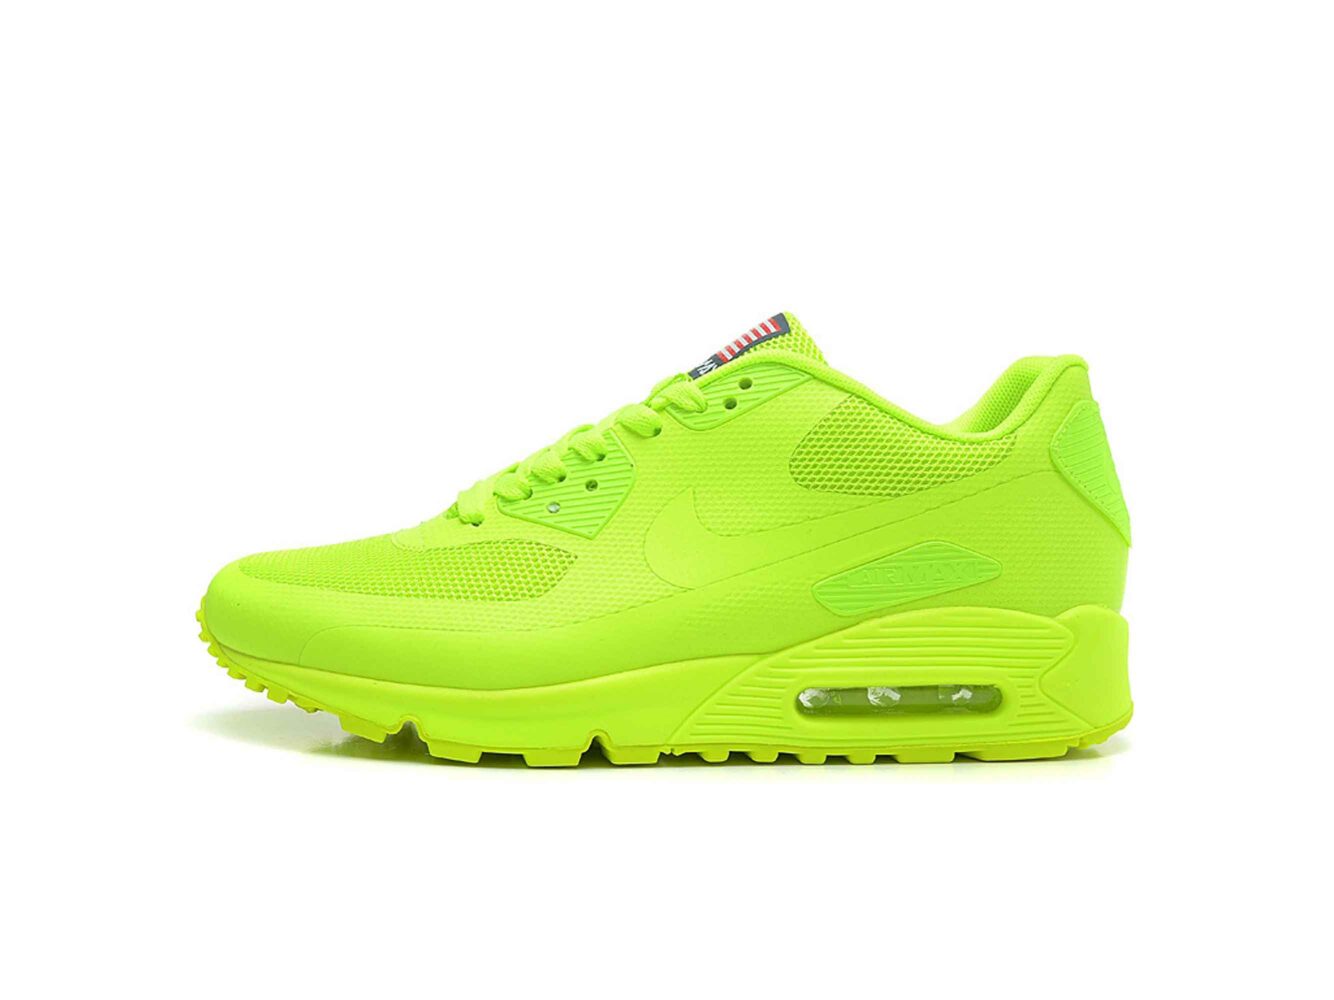 Nike Air Max 90 Hyperfuse Independence Day 2013 Volt Купить